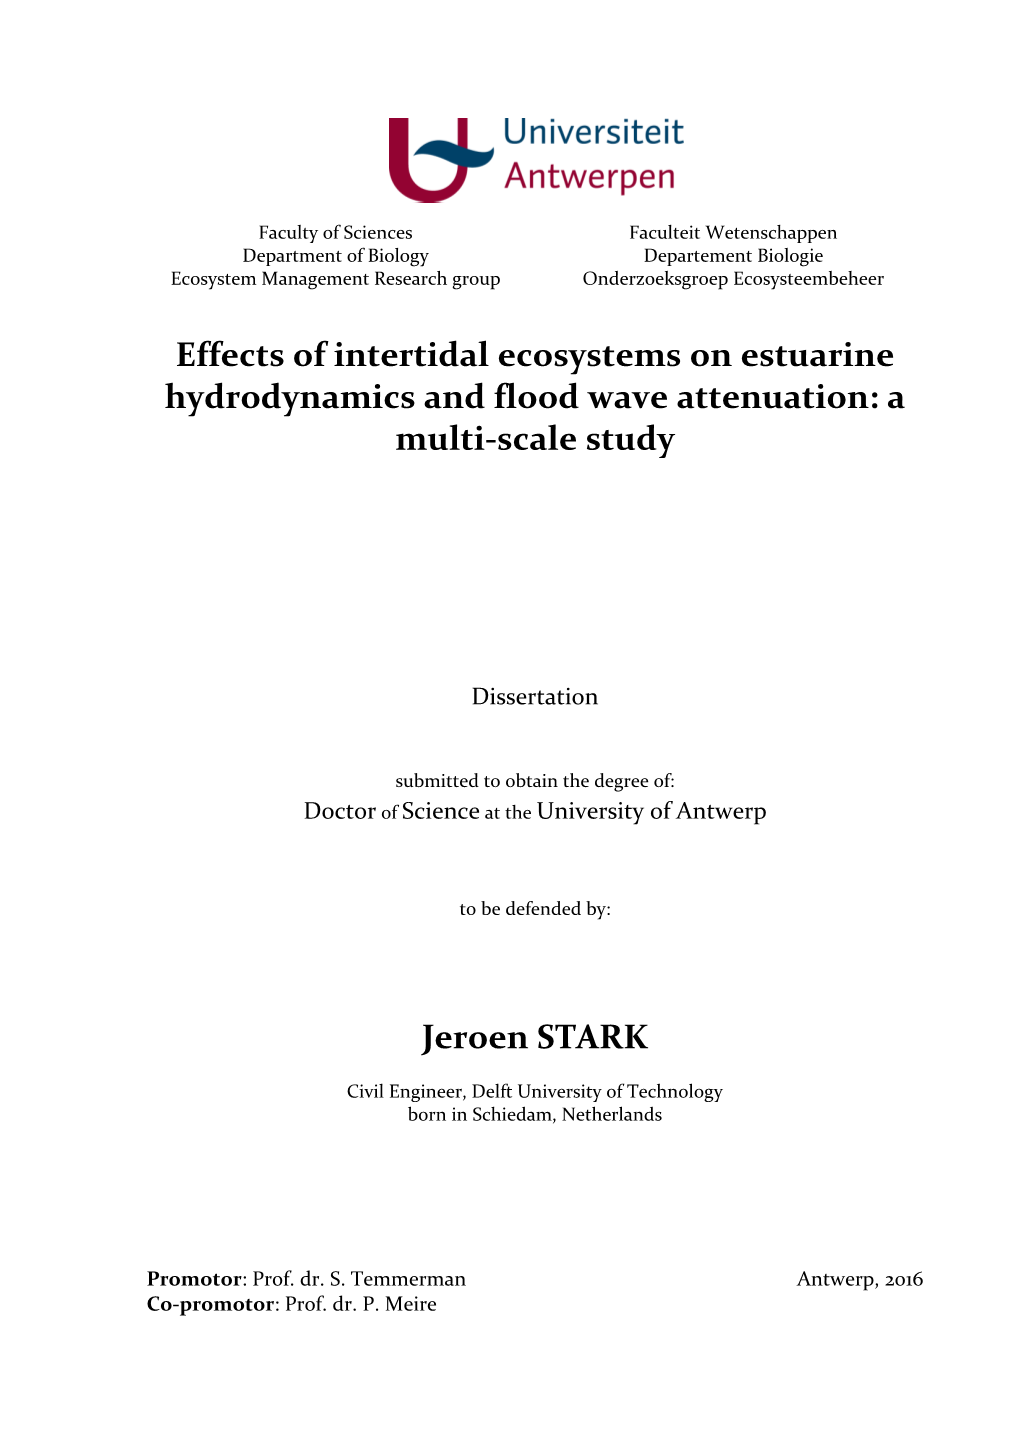 Effects of Intertidal Ecosystems on Estuarine Hydrodynamics and Flood Wave Attenuation: a Multi-Scale Study